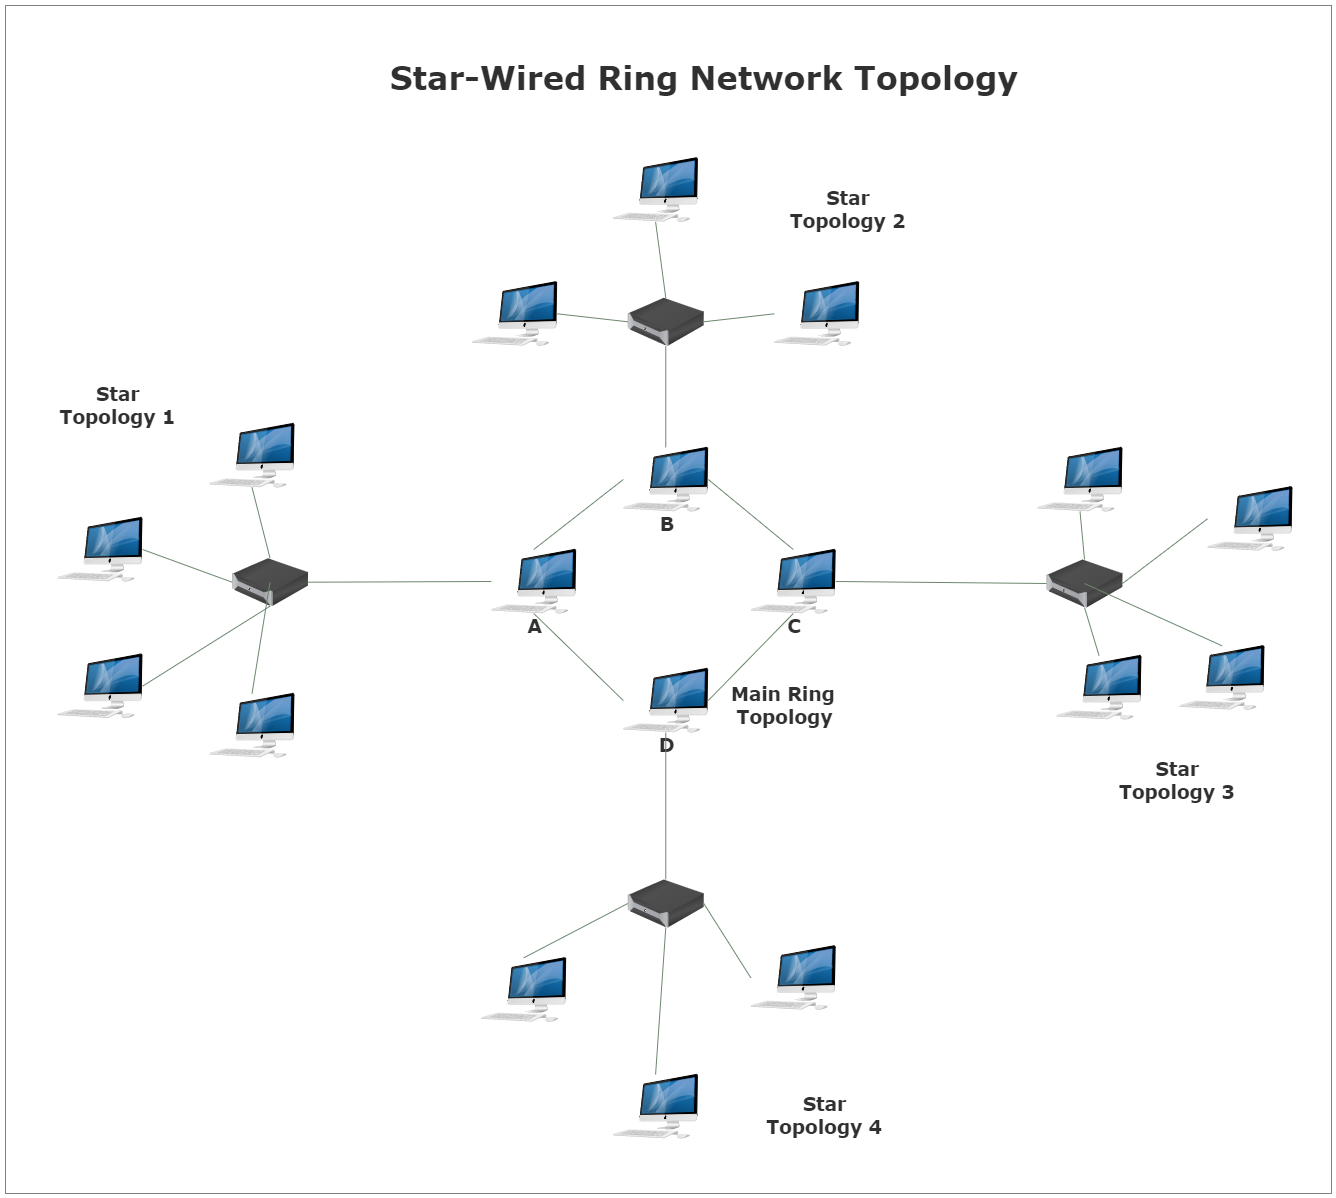 Star-Wired Ring Network Topology